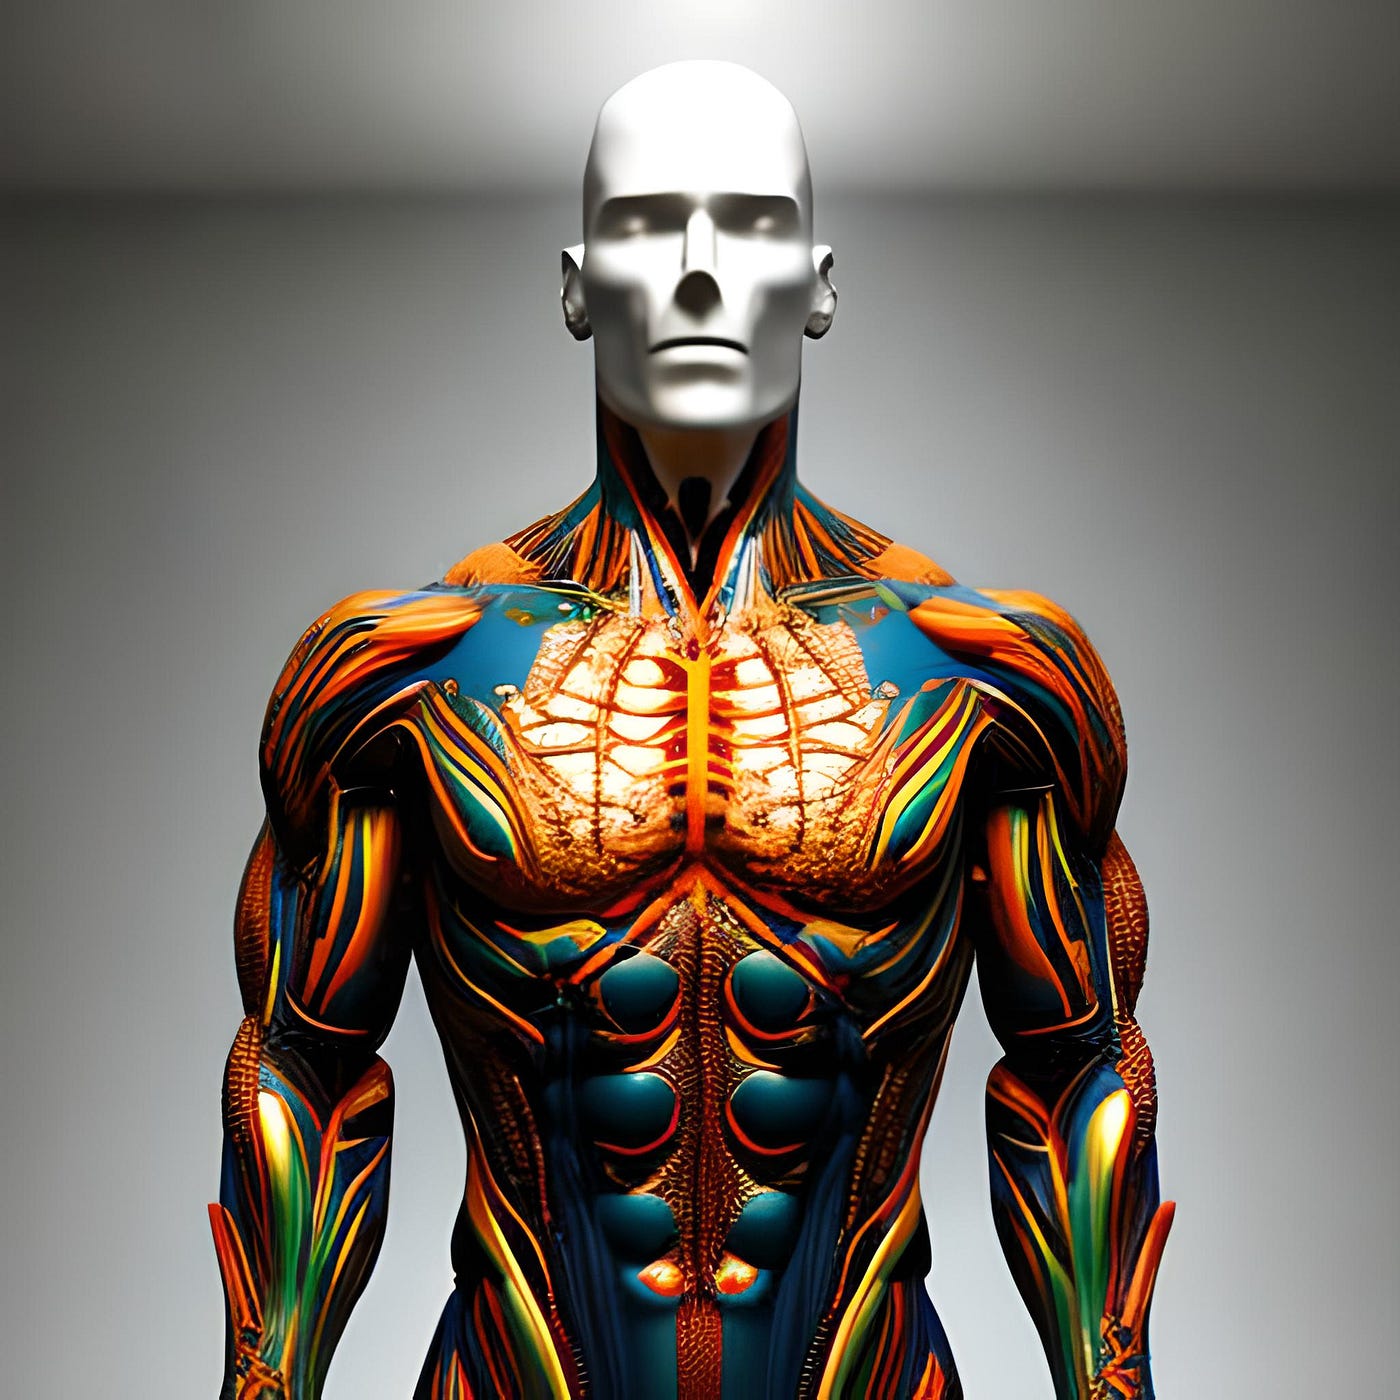 How Does Electrical Muscle Stimulation Work?